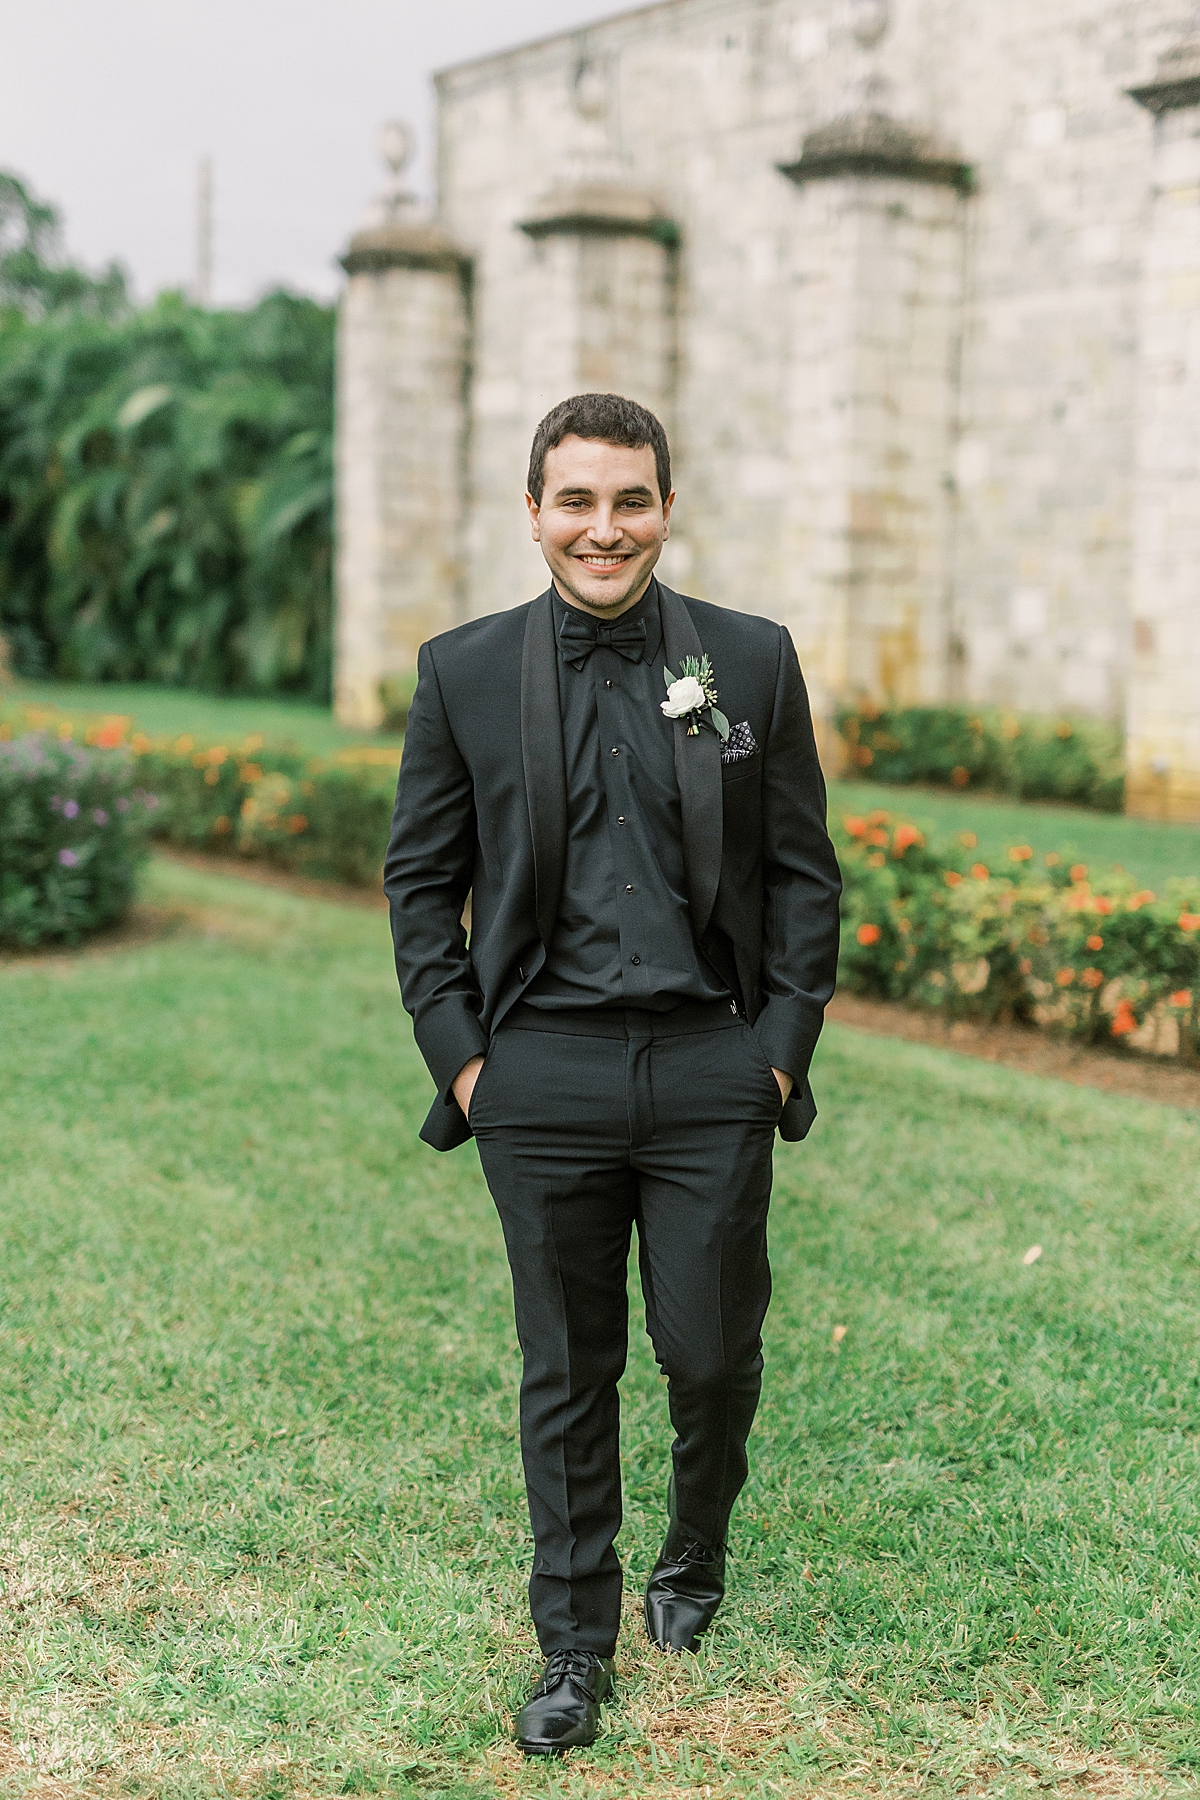 An image of the groom smiling at the camera.